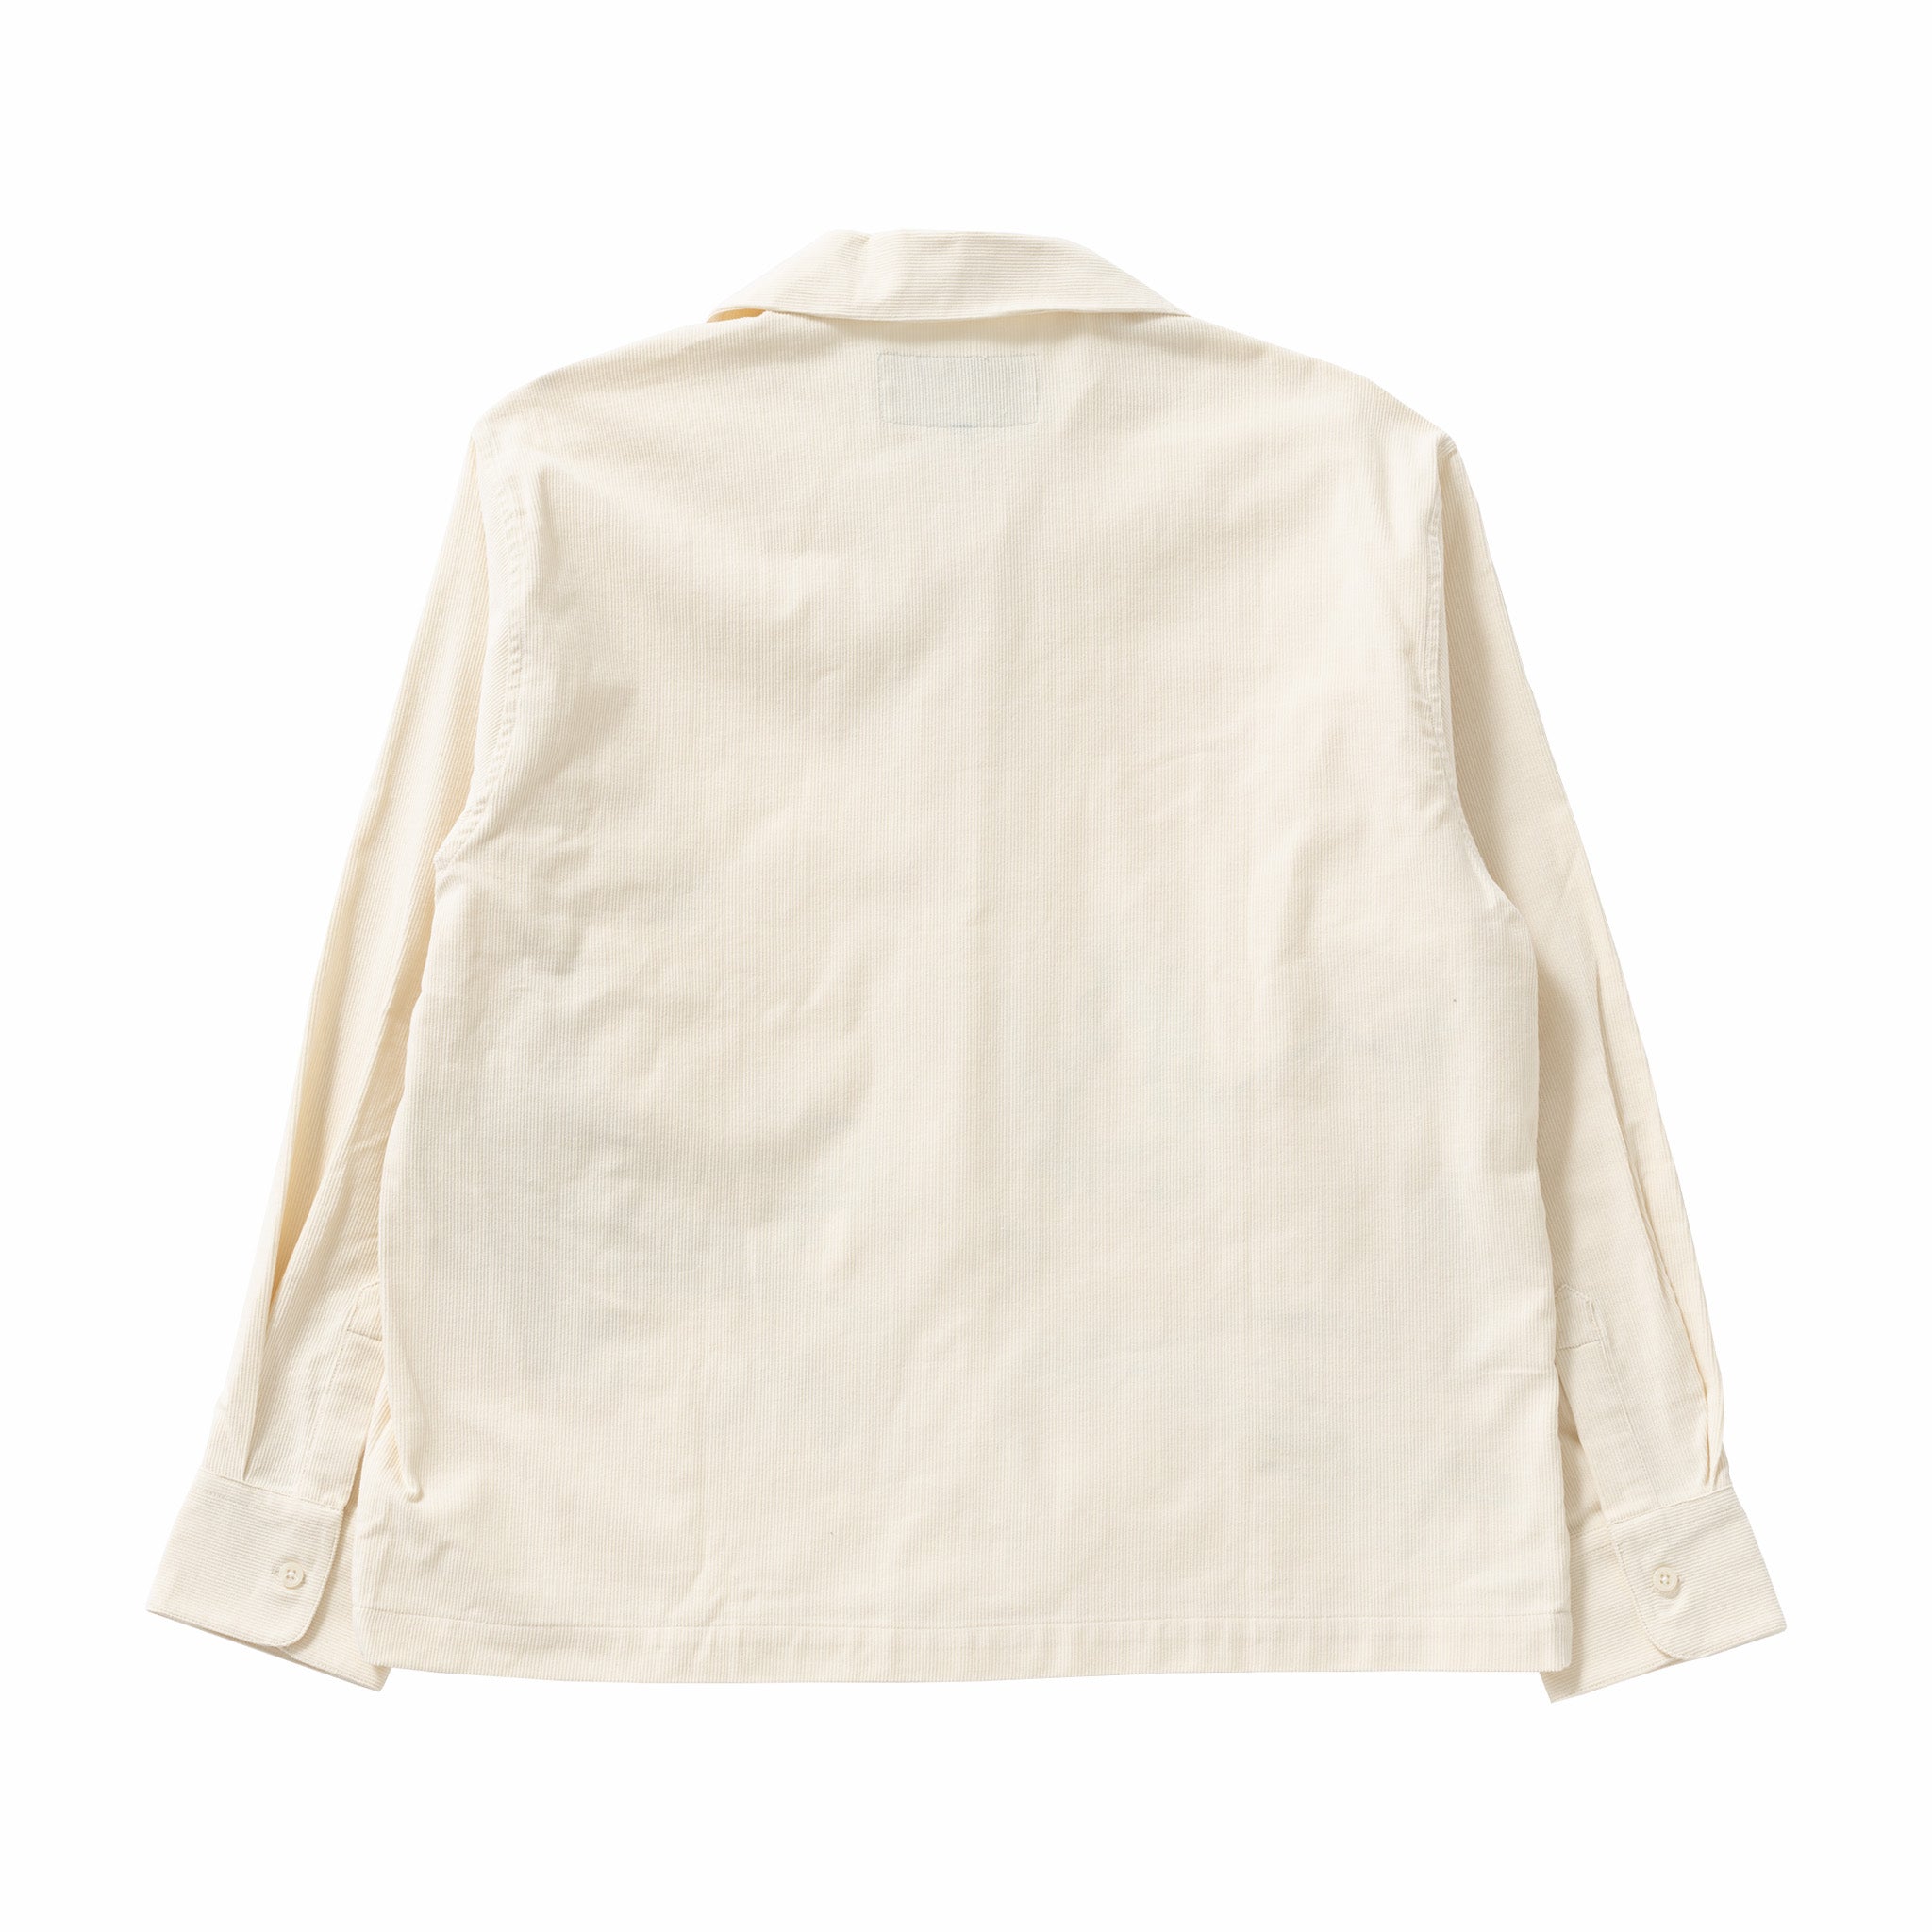 Carne Bollente Miss Dick RIver Button Up Shirt (White) - August Shop